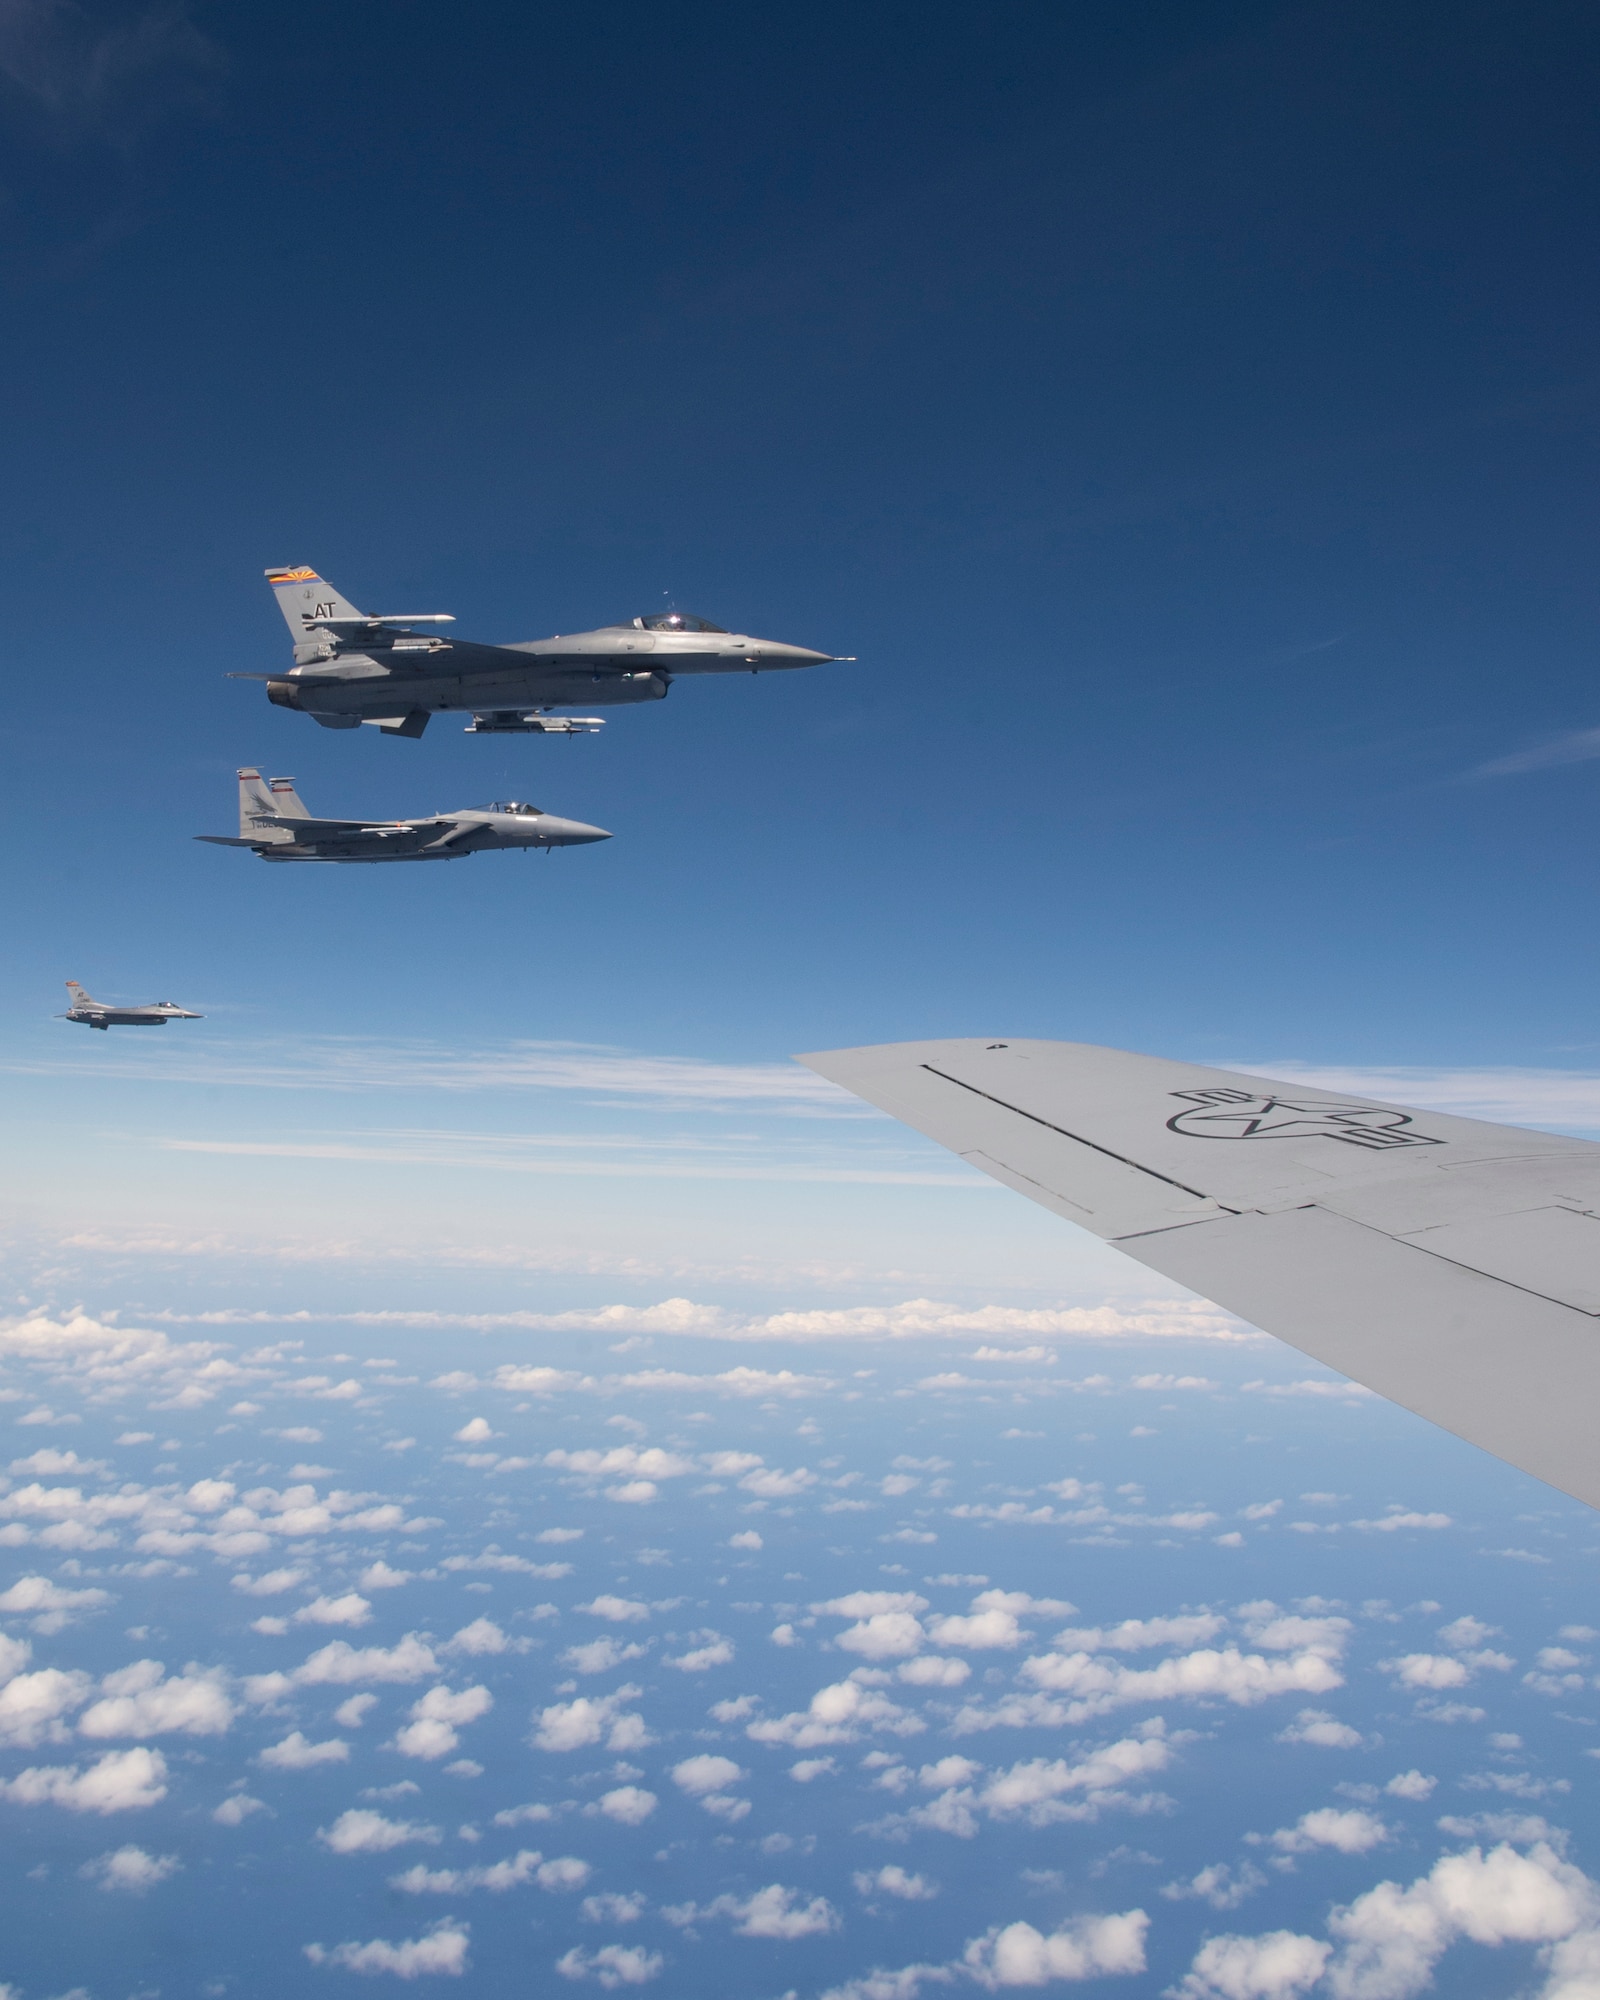 Two F-16 Fighting Falcons from the 162nd Fighter Wing, Arizona Air National Guard, and one F-15 Strike Eagle from the 142nd Fighter Wing, Oregon Air National Guard, fly in formation off the left wing of a KC-135R Stratotanker from the 96th Air Refueling Squadron, during the Hawaii Air National Guard’s large-scale fighter exercise Sentry Aloha over Hawaii, March. 5, 2015.  Additionally the F-22 Raptor, A-10 Warthog, C-130 Hercules and U.S. Naval F/A-18 Hornet will participate in Sentry Aloha. (U.S. Air Force photo by Tech. Sgt. Aaron Oelrich/Released)